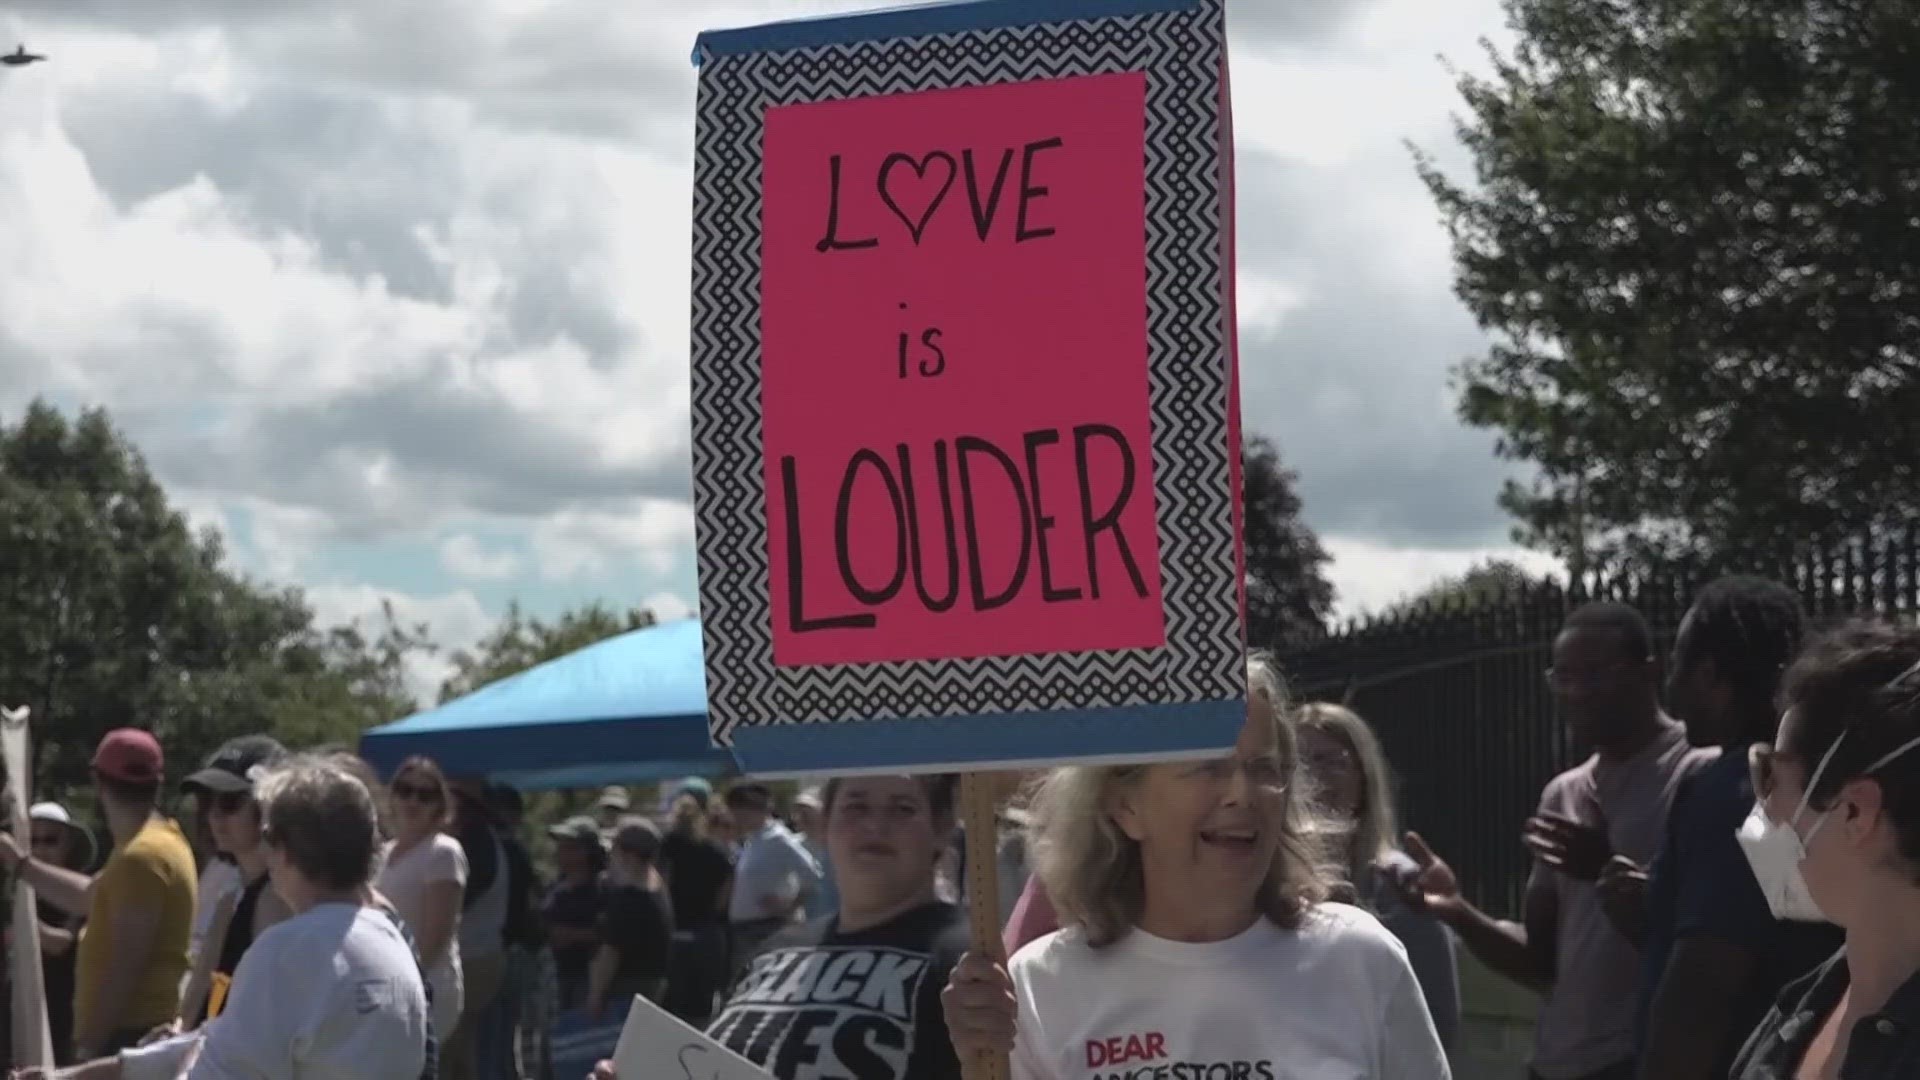 A counter-protest was held against local neo-Nazi group NSC-131 in Augusta on Saturday, sparking meaningful conversations among community members.